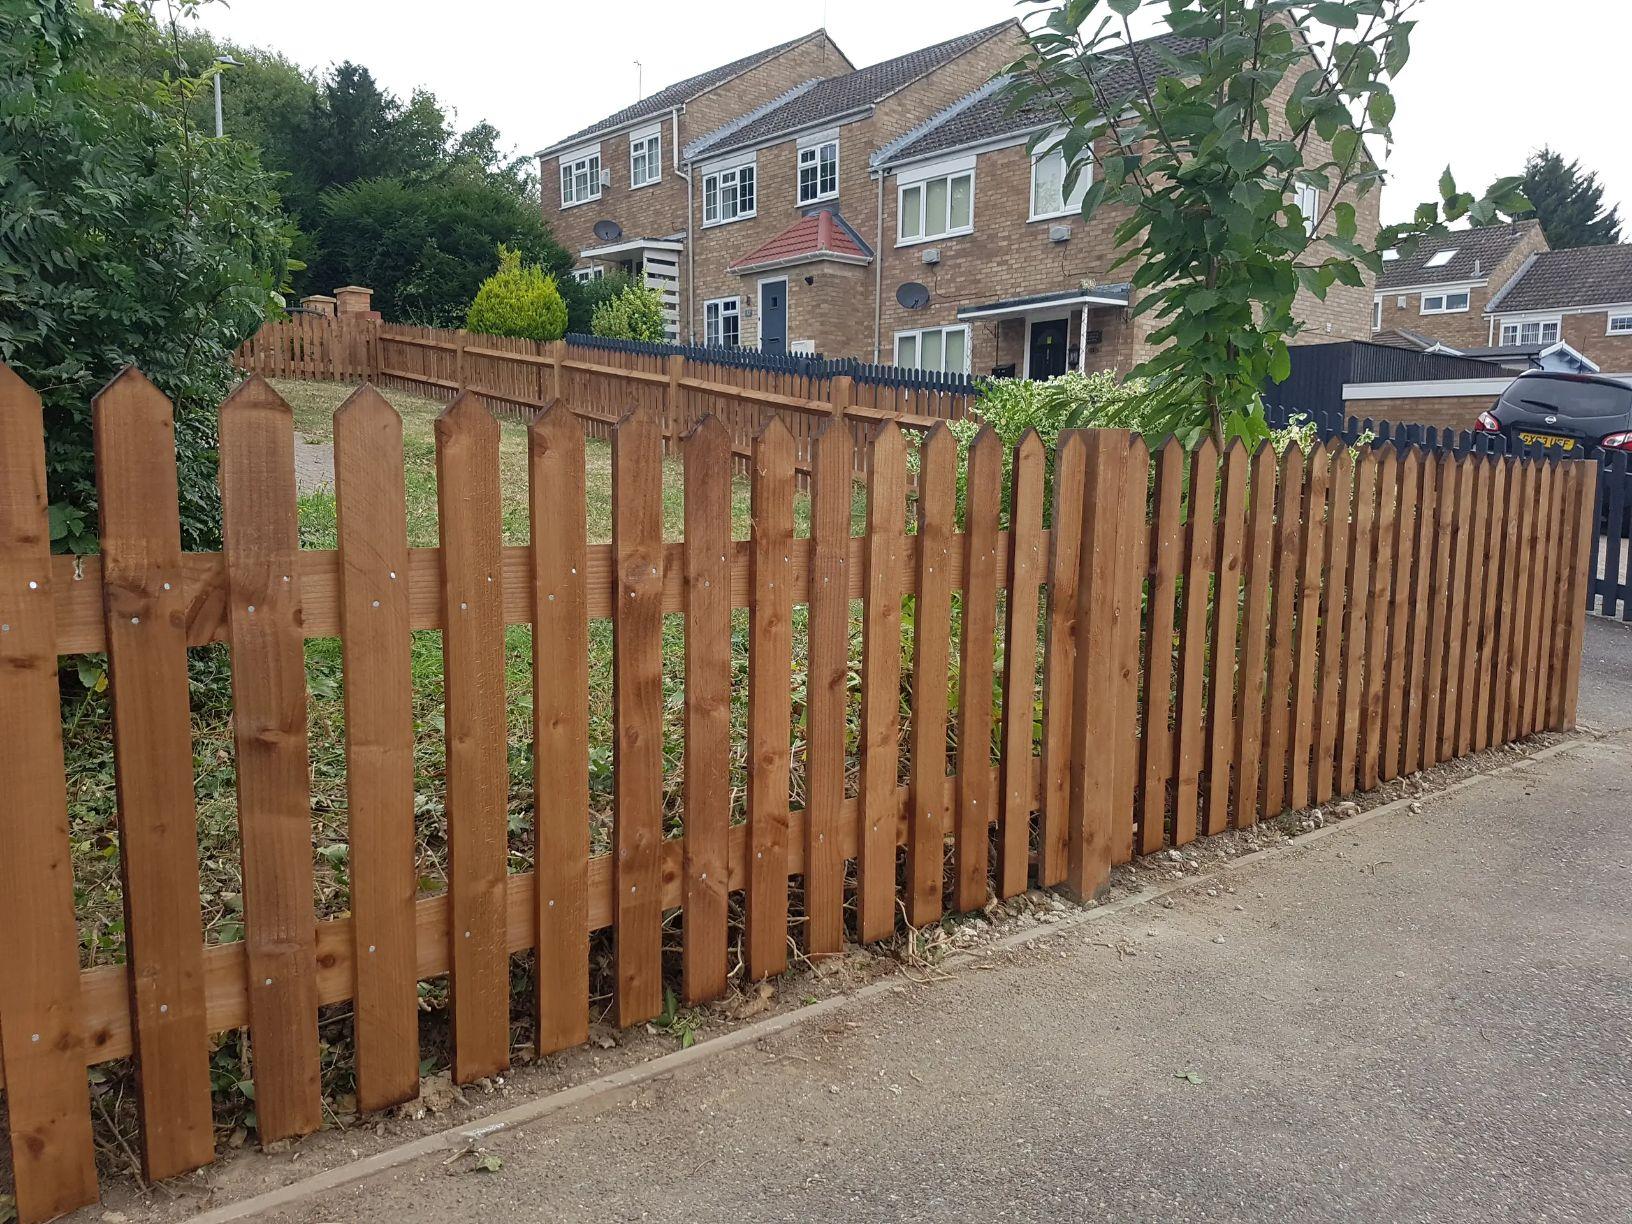 Local fencing company based in Lordswood, Medway